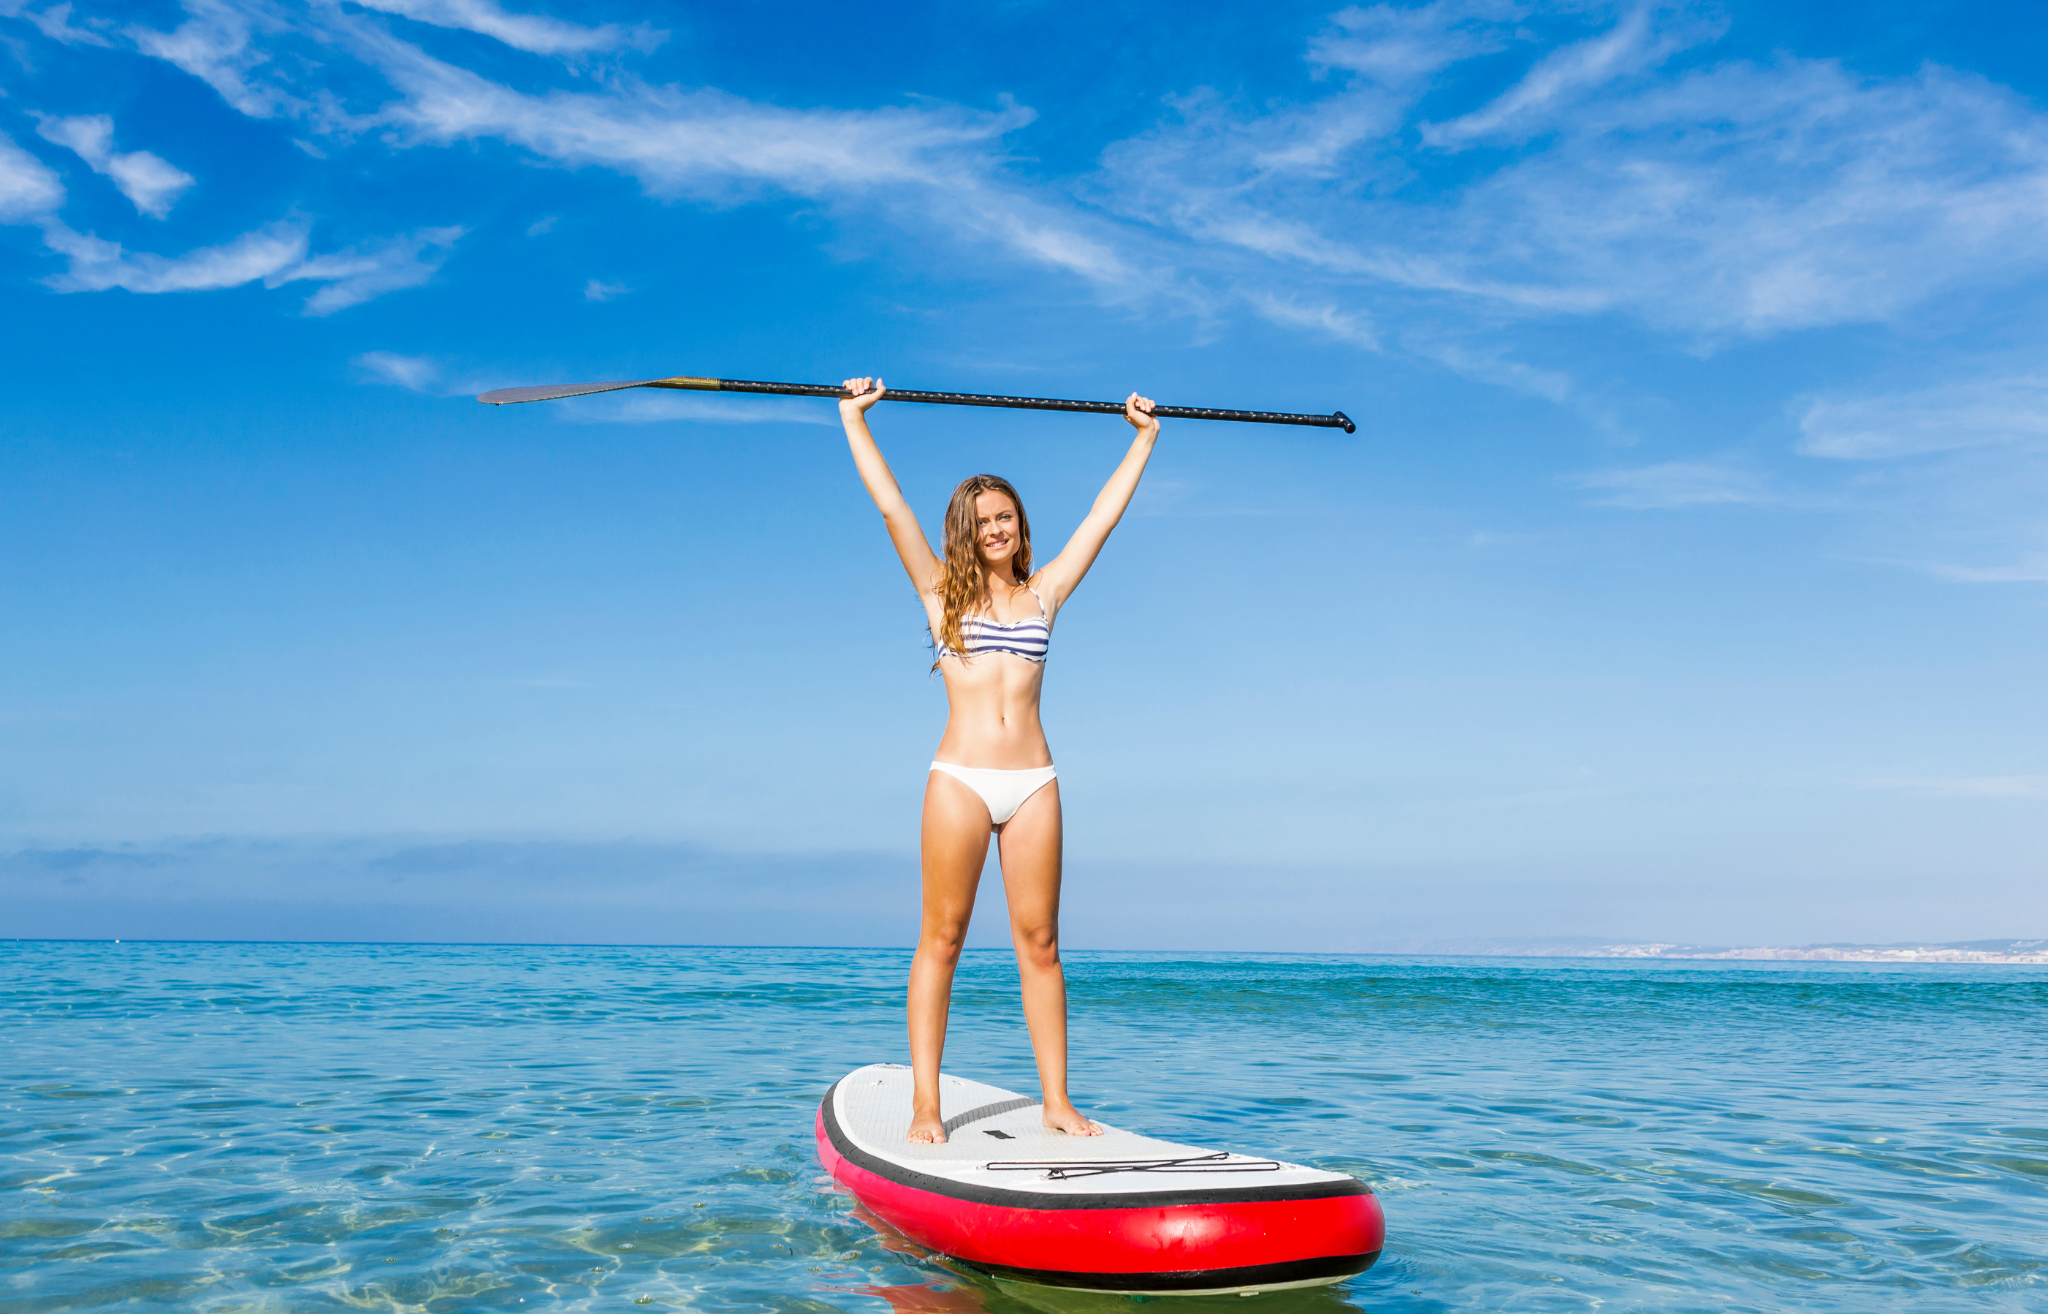 Woman on paddle board lifting paddle above her head - Adventure Wise Travel Gear